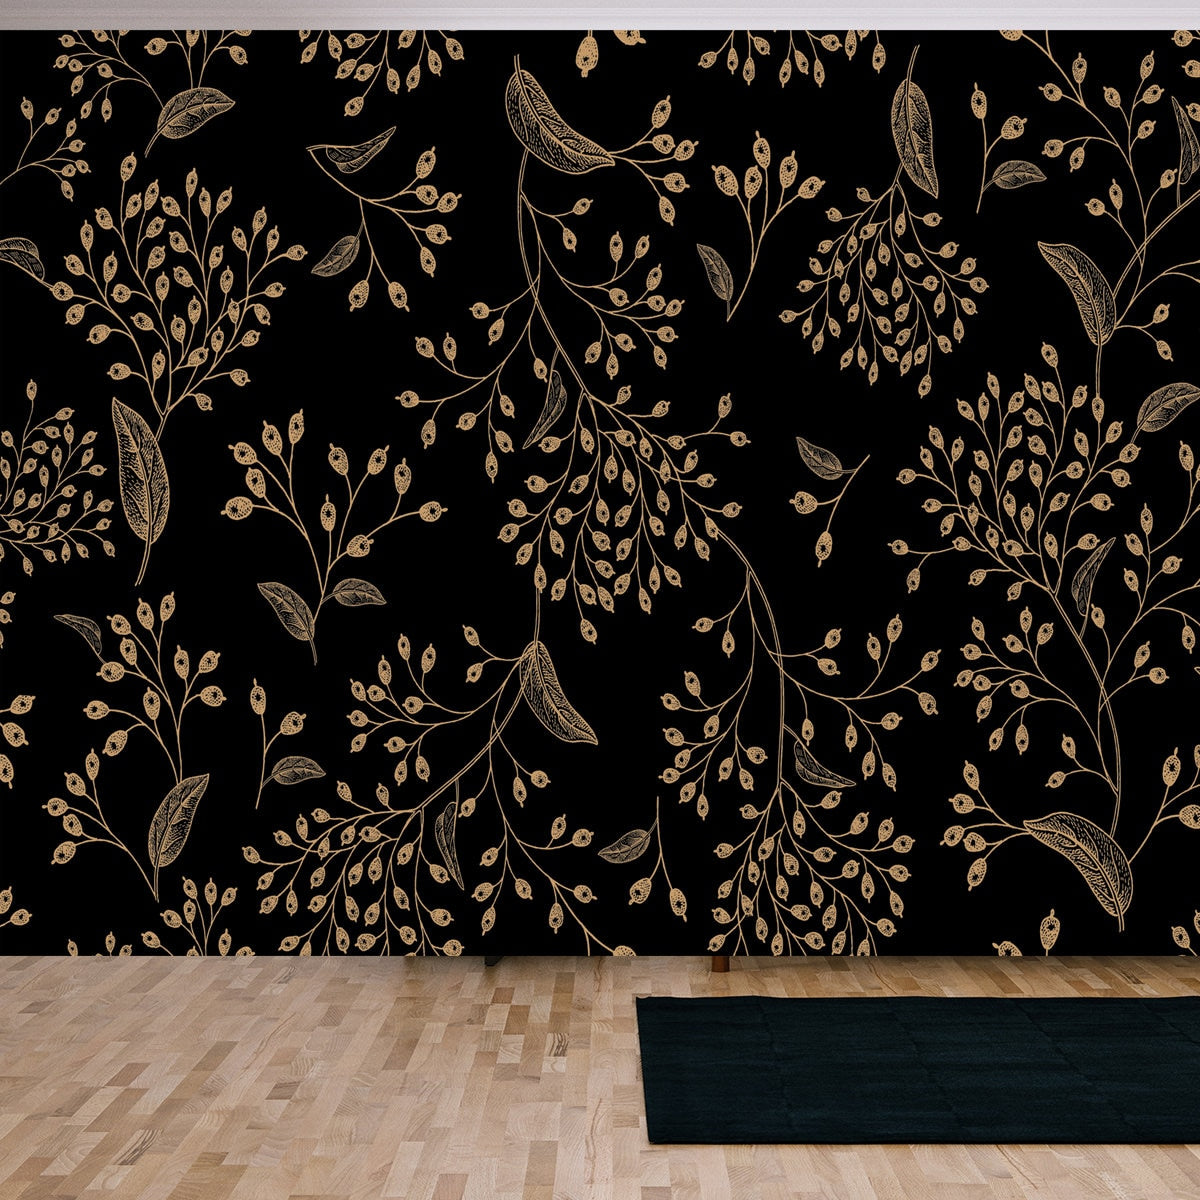 Floral Vintage Seamless Pattern. Black and Gold. Oriental Style Wallpaper Living Room Mural